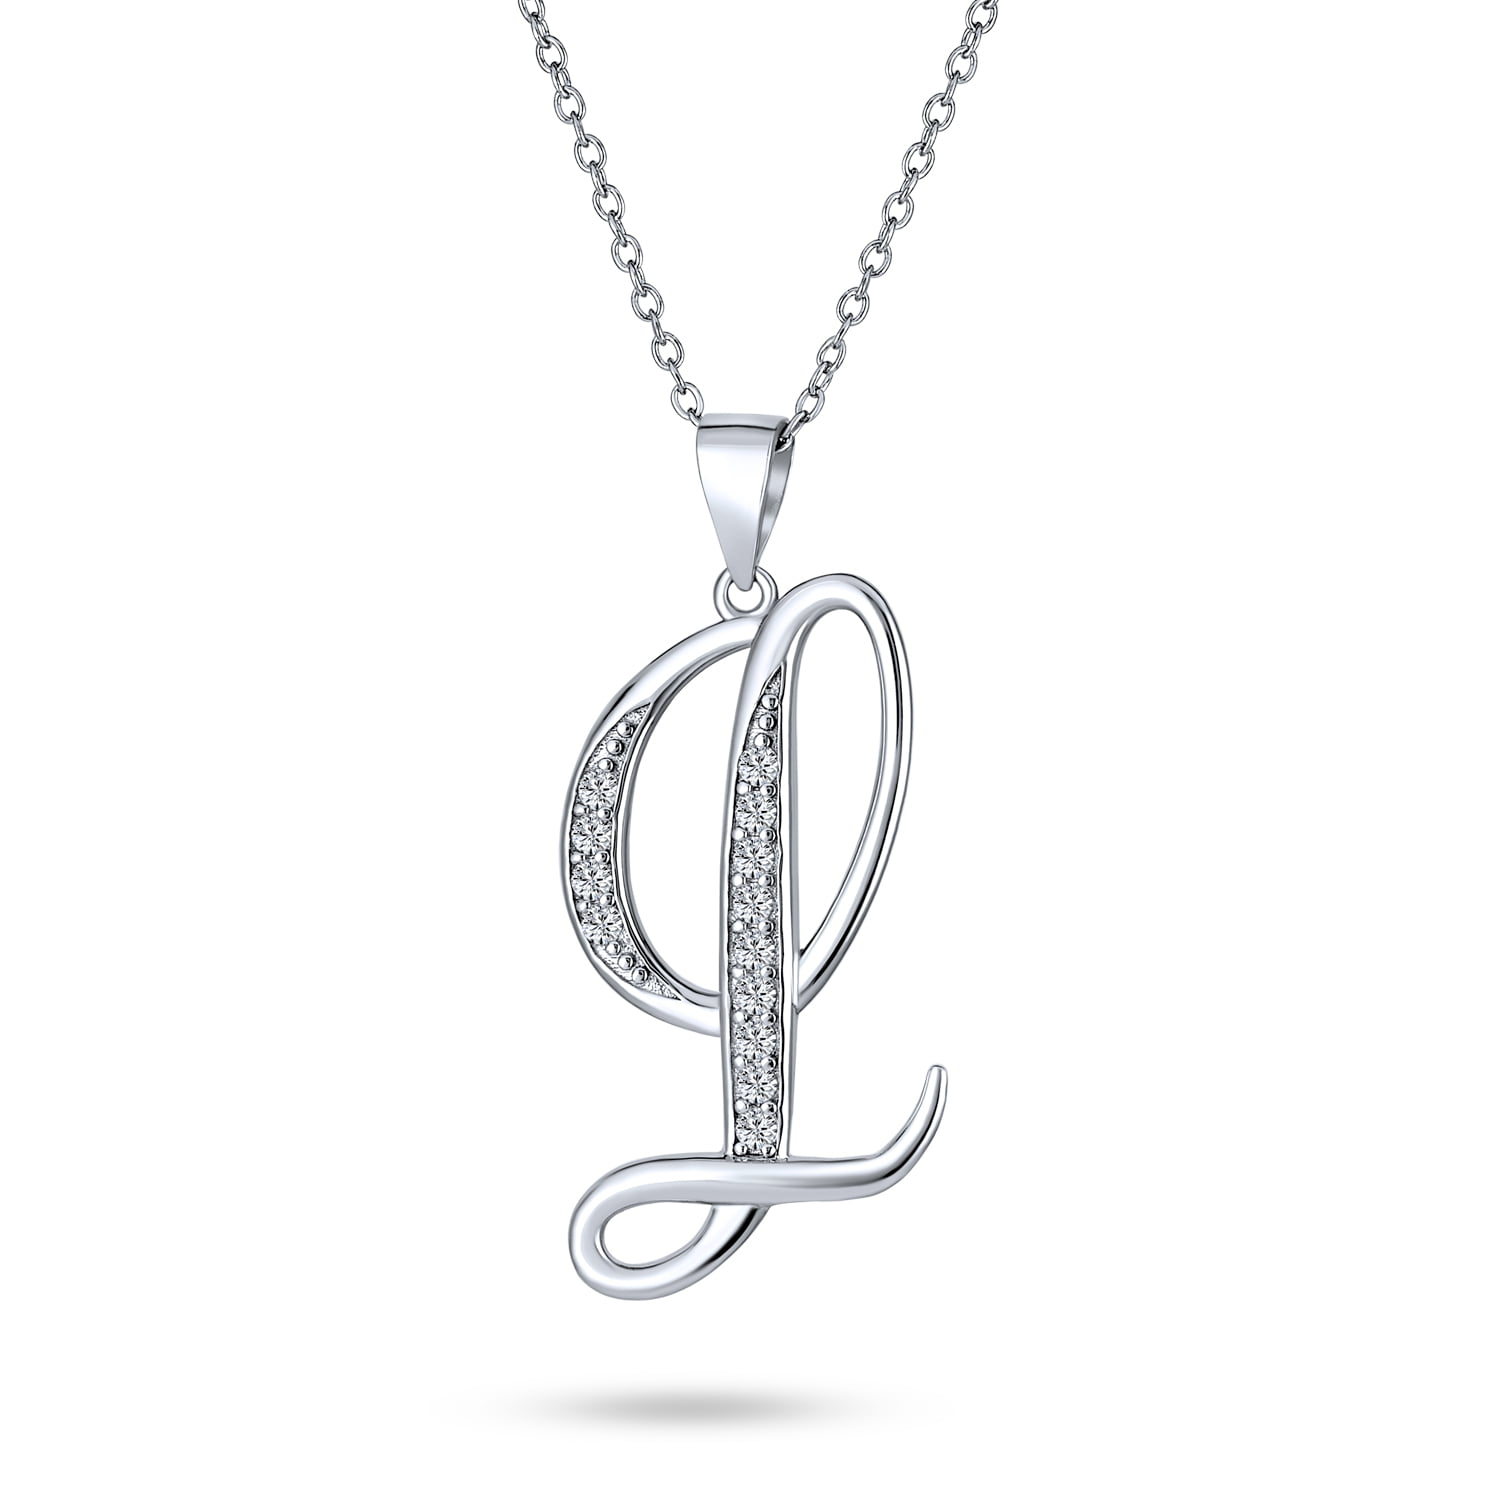 Initial Letter "L" Cubic Zirconia CZ Crystal Symbol Necklace Pendant in 14k Gold 